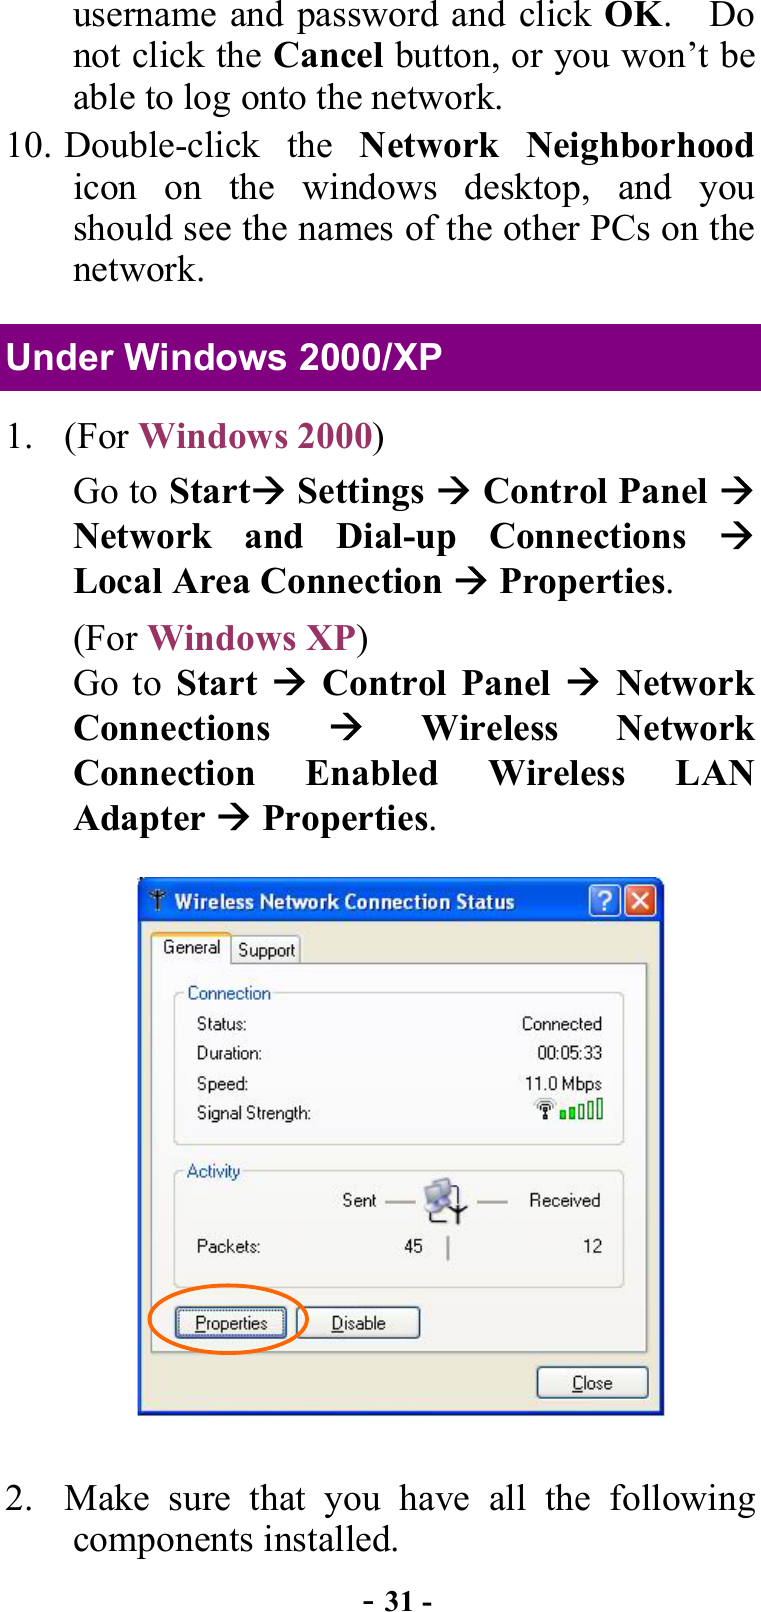  - 31 - username and password and click OK.  Do not click the Cancel button, or you won’t be able to log onto the network. 10. Double-click  the  Network Neighborhood icon on the windows desktop, and you should see the names of the other PCs on the network. Under Windows 2000/XP 1. (For Windows 2000) Go to Start Settings  Control Panel  Network and Dial-up Connections  Local Area Connection  Properties. (For Windows XP)  Go to Start   Control Panel  Network Connections   Wireless Network Connection Enabled Wireless LAN Adapter  Properties.  2.  Make sure that you have all the following components installed. 